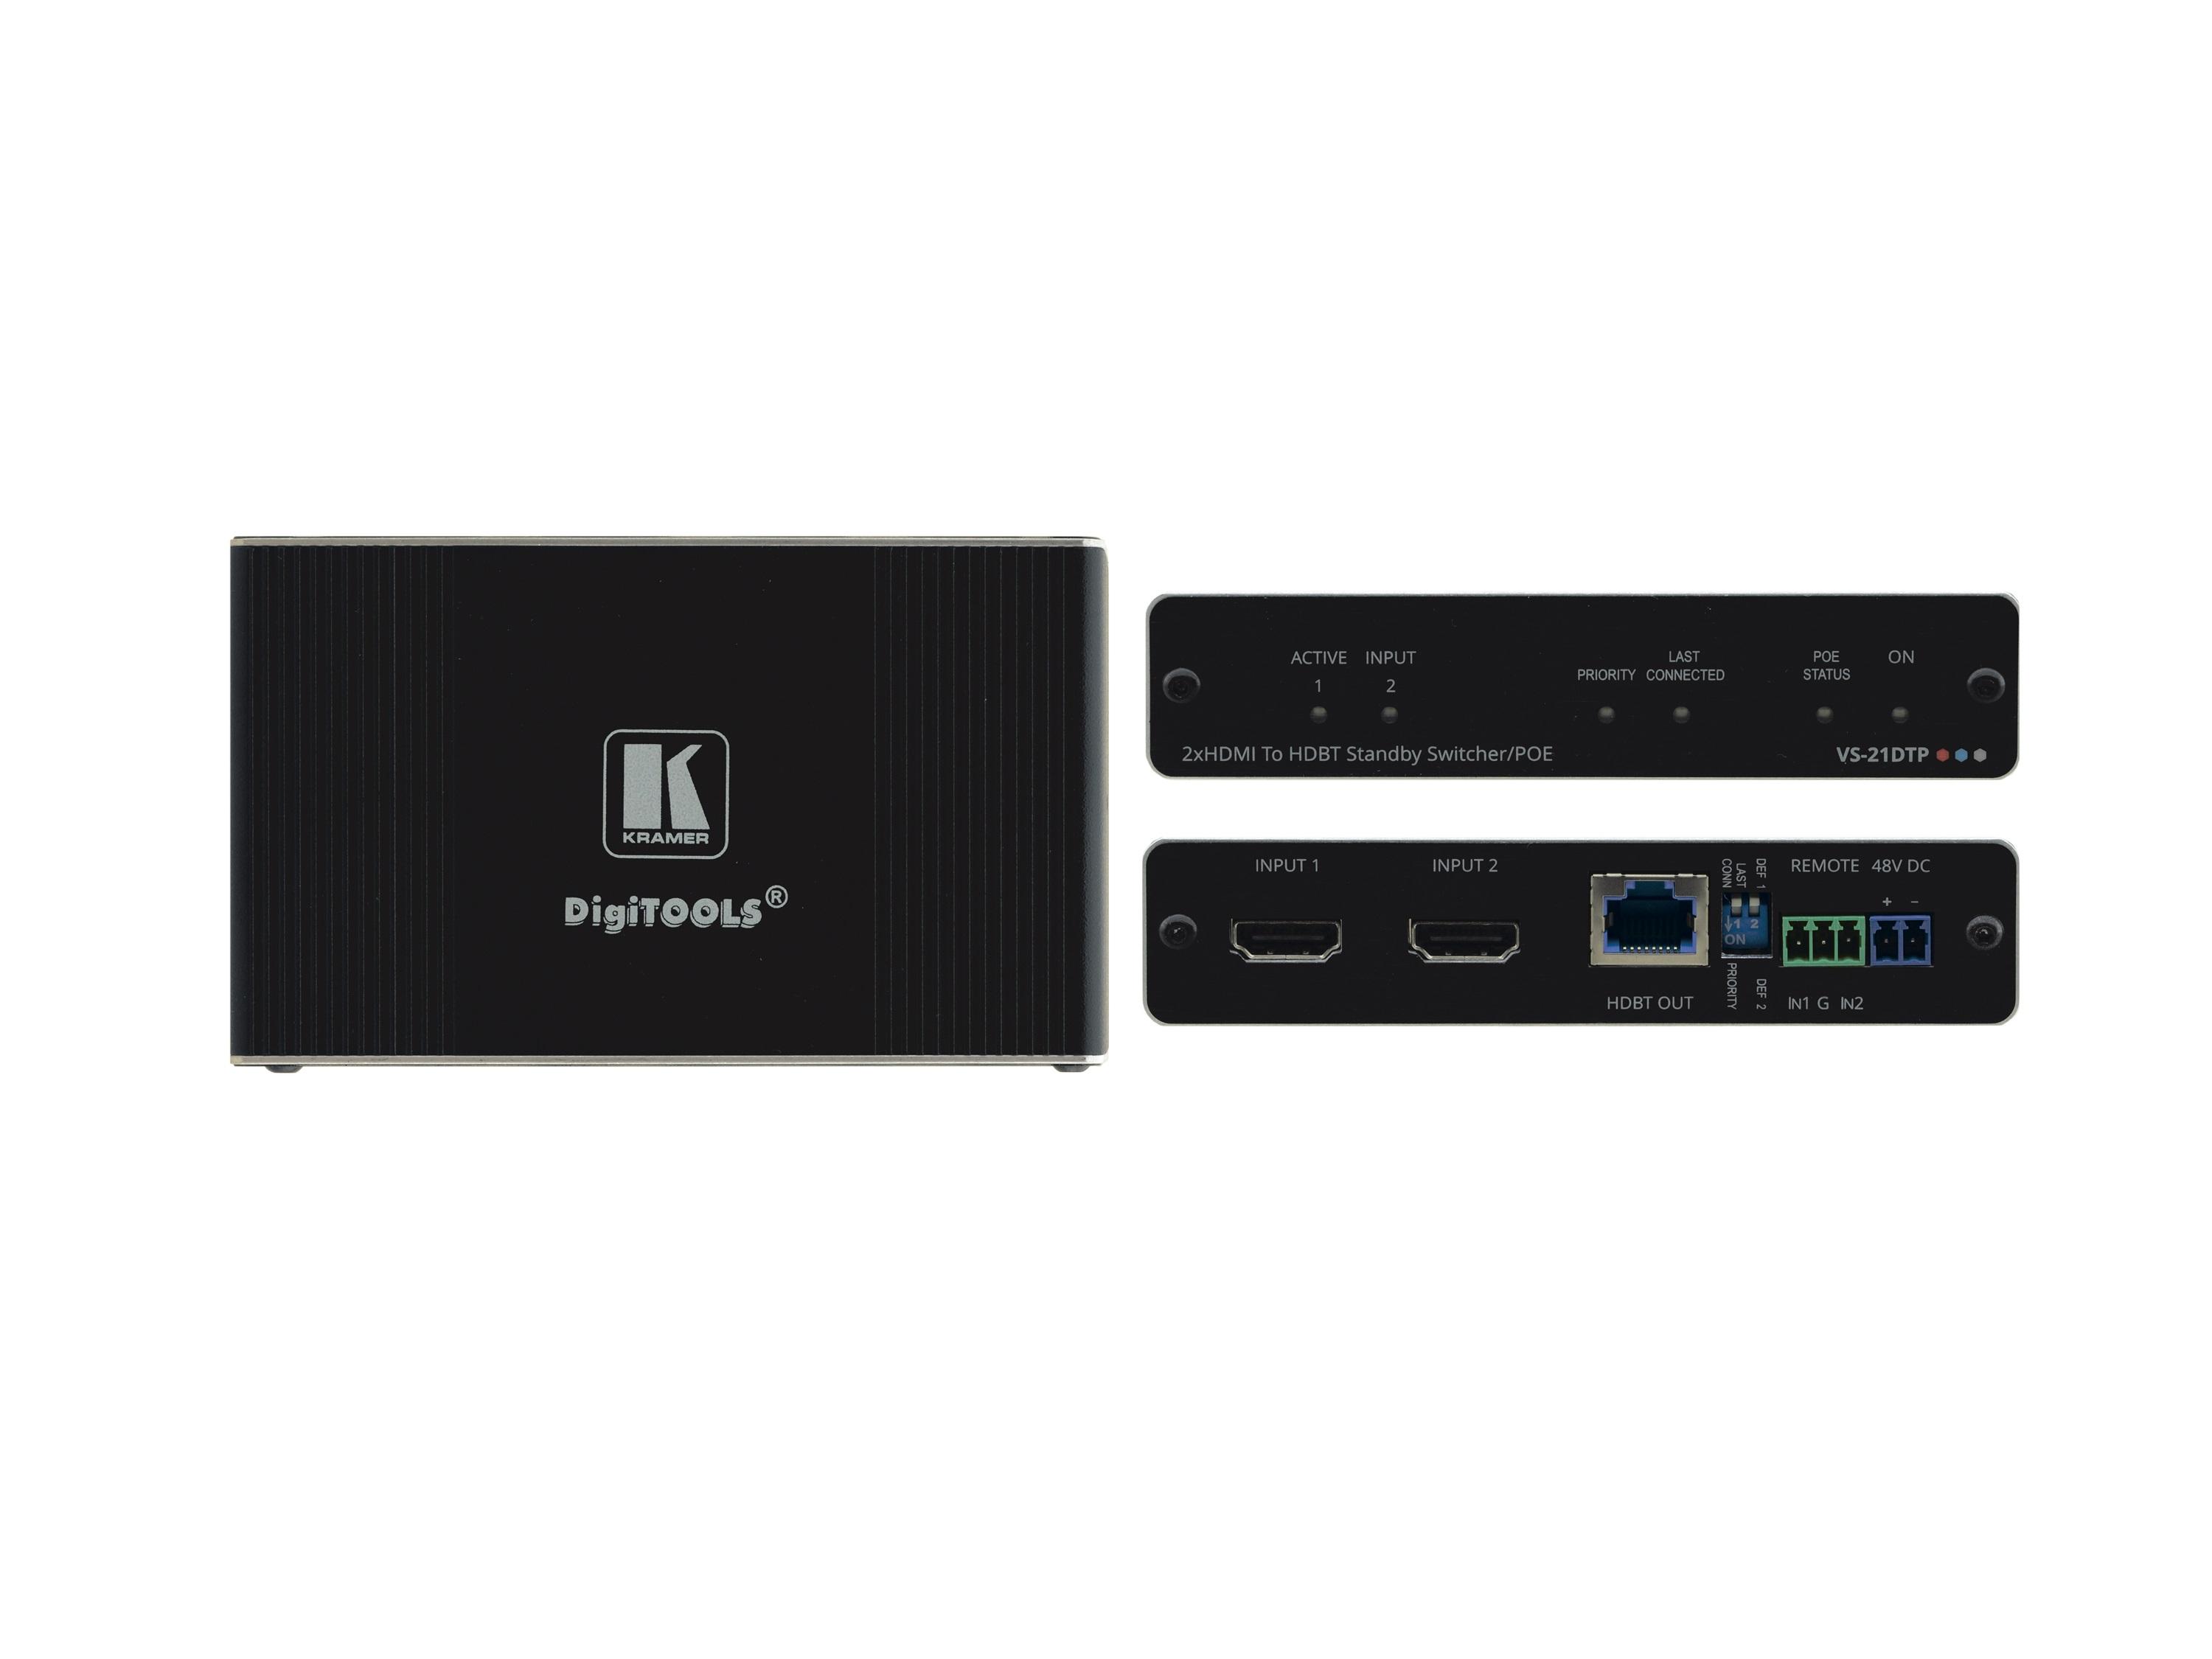 VS-21DTP 2x1 4K60 4x2x0 HDCP 2.2 HDMI Auto Switcher with Bidirectional PoE over HDBaseT by Kramer